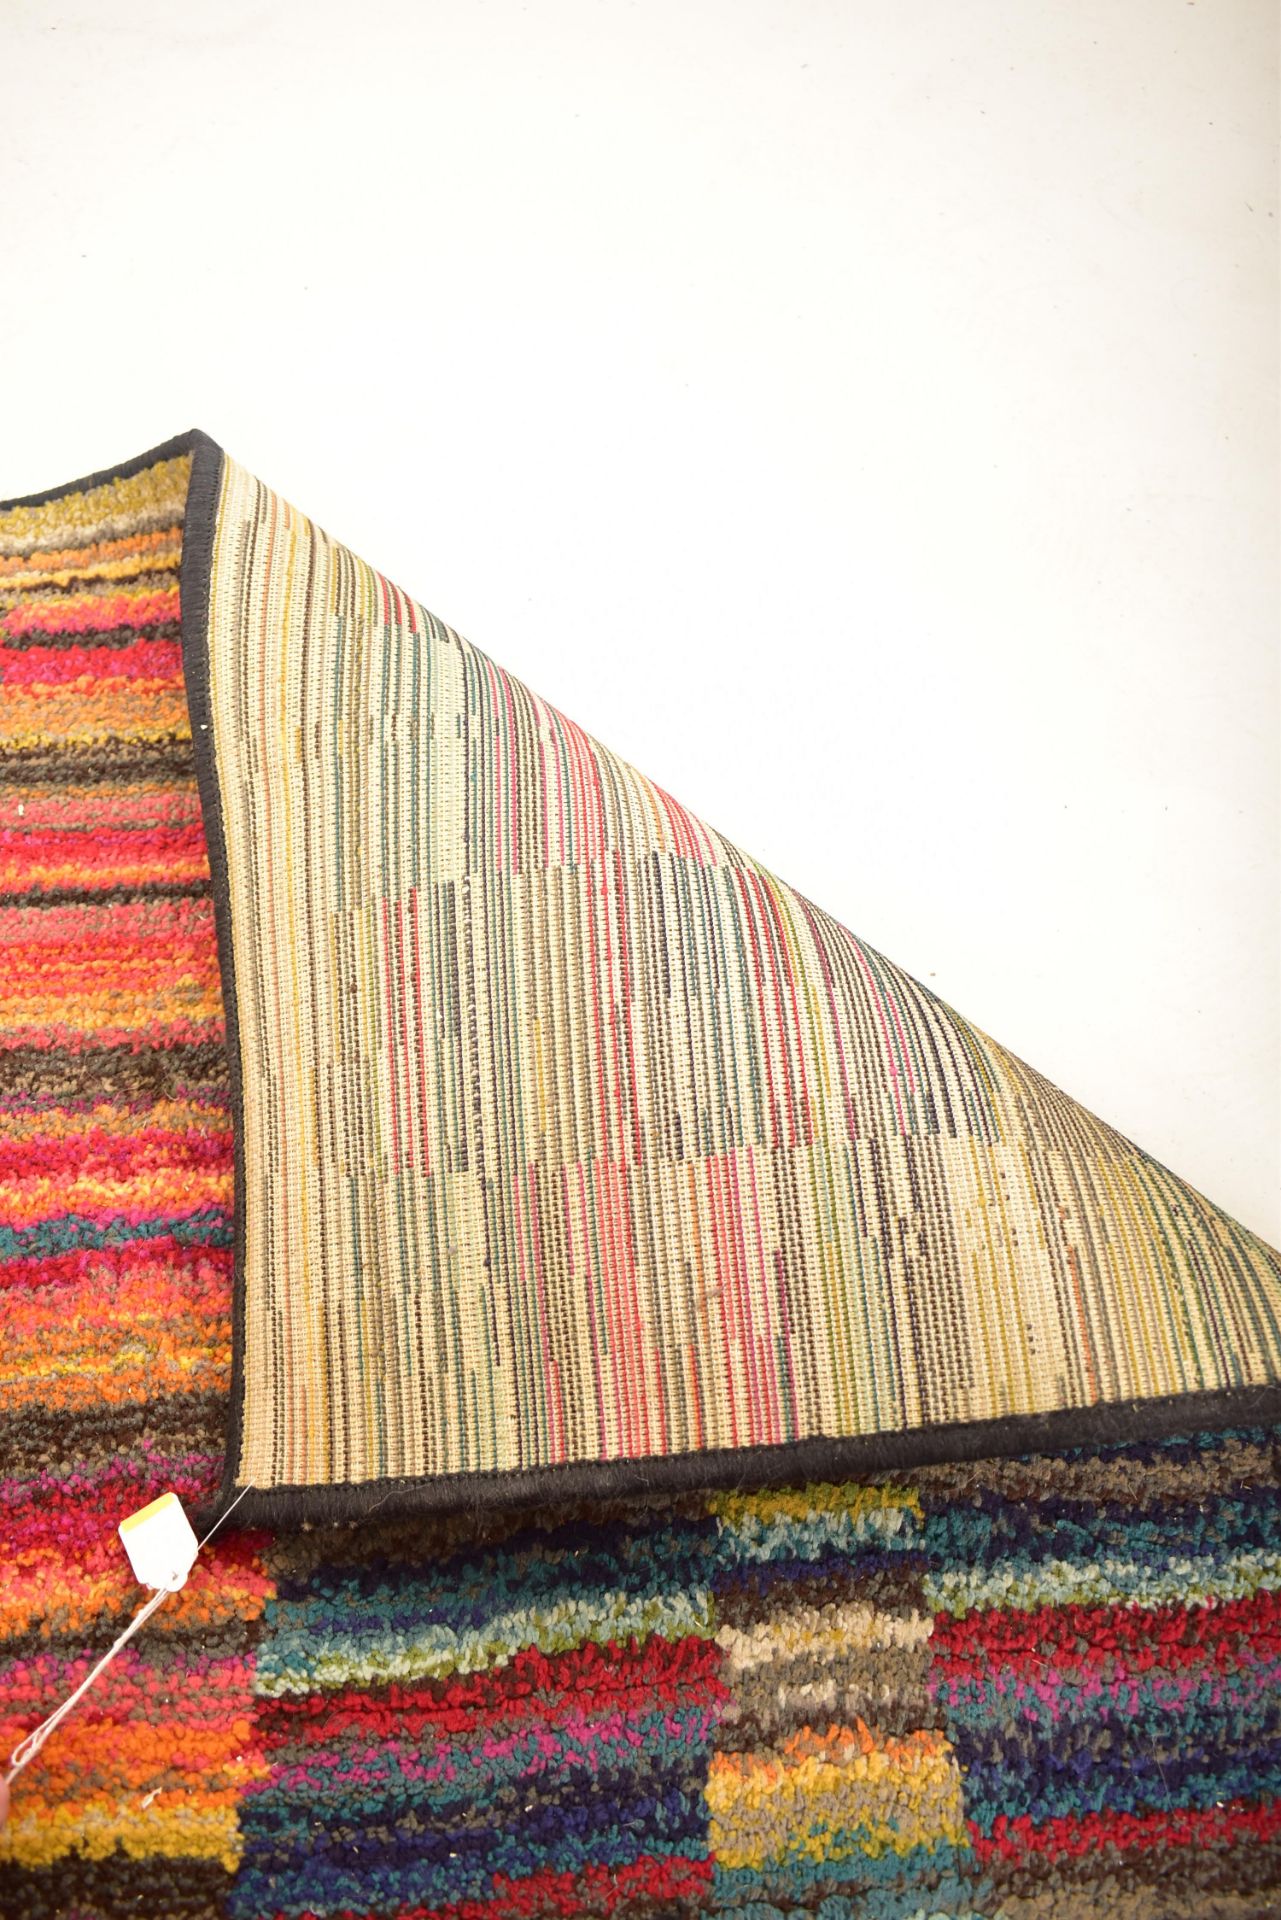 LATE 20TH CENTURY MULTI COLOURED WOOLLEN RUG - Image 4 of 5